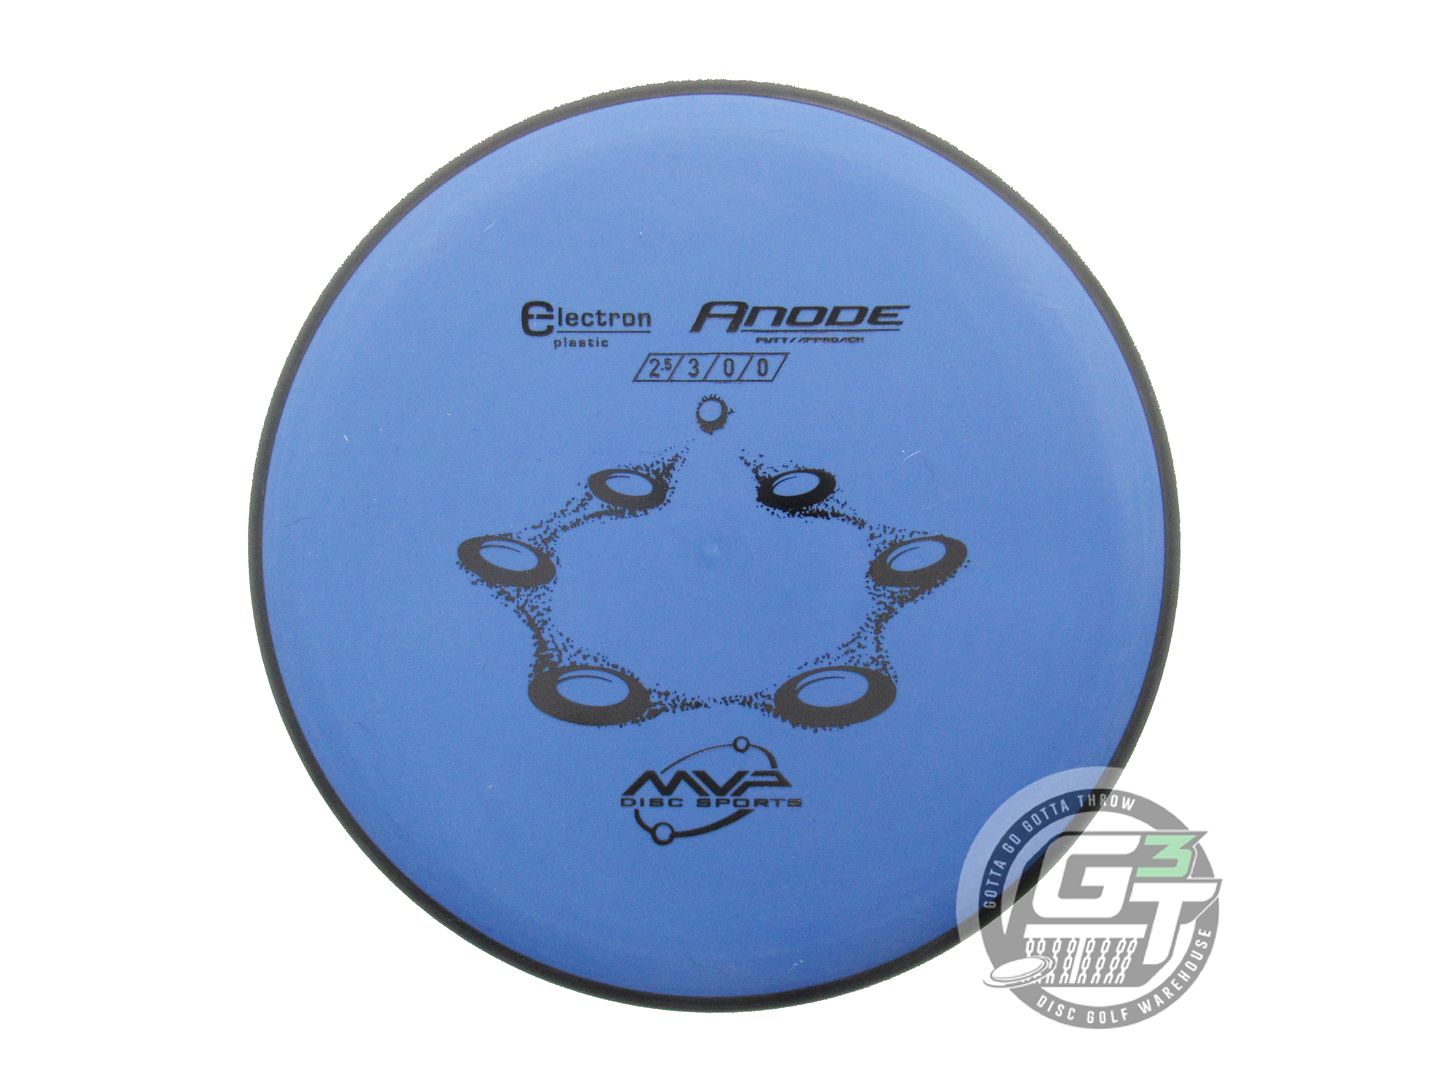 MVP Electron Anode Putter Golf Disc (Individually Listed)